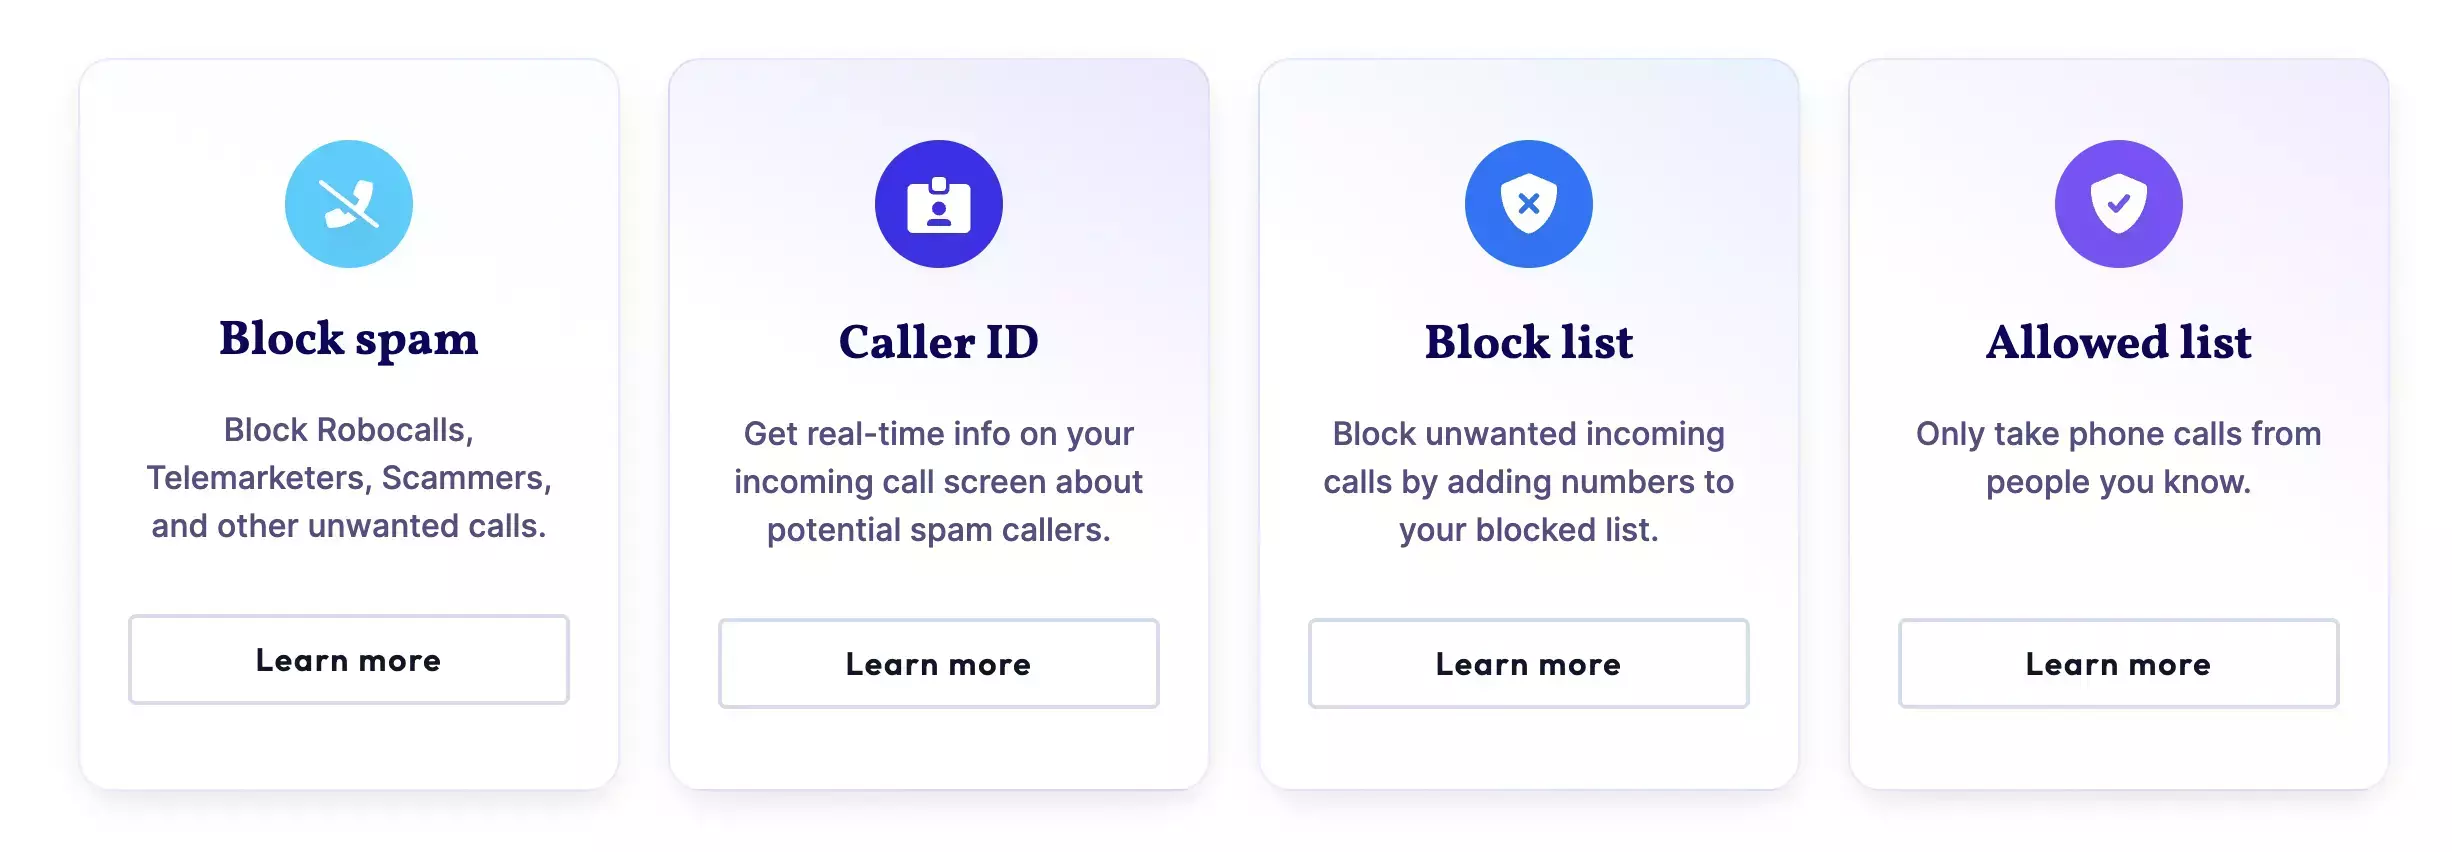 An image showing features of Community Phone Spam blocker